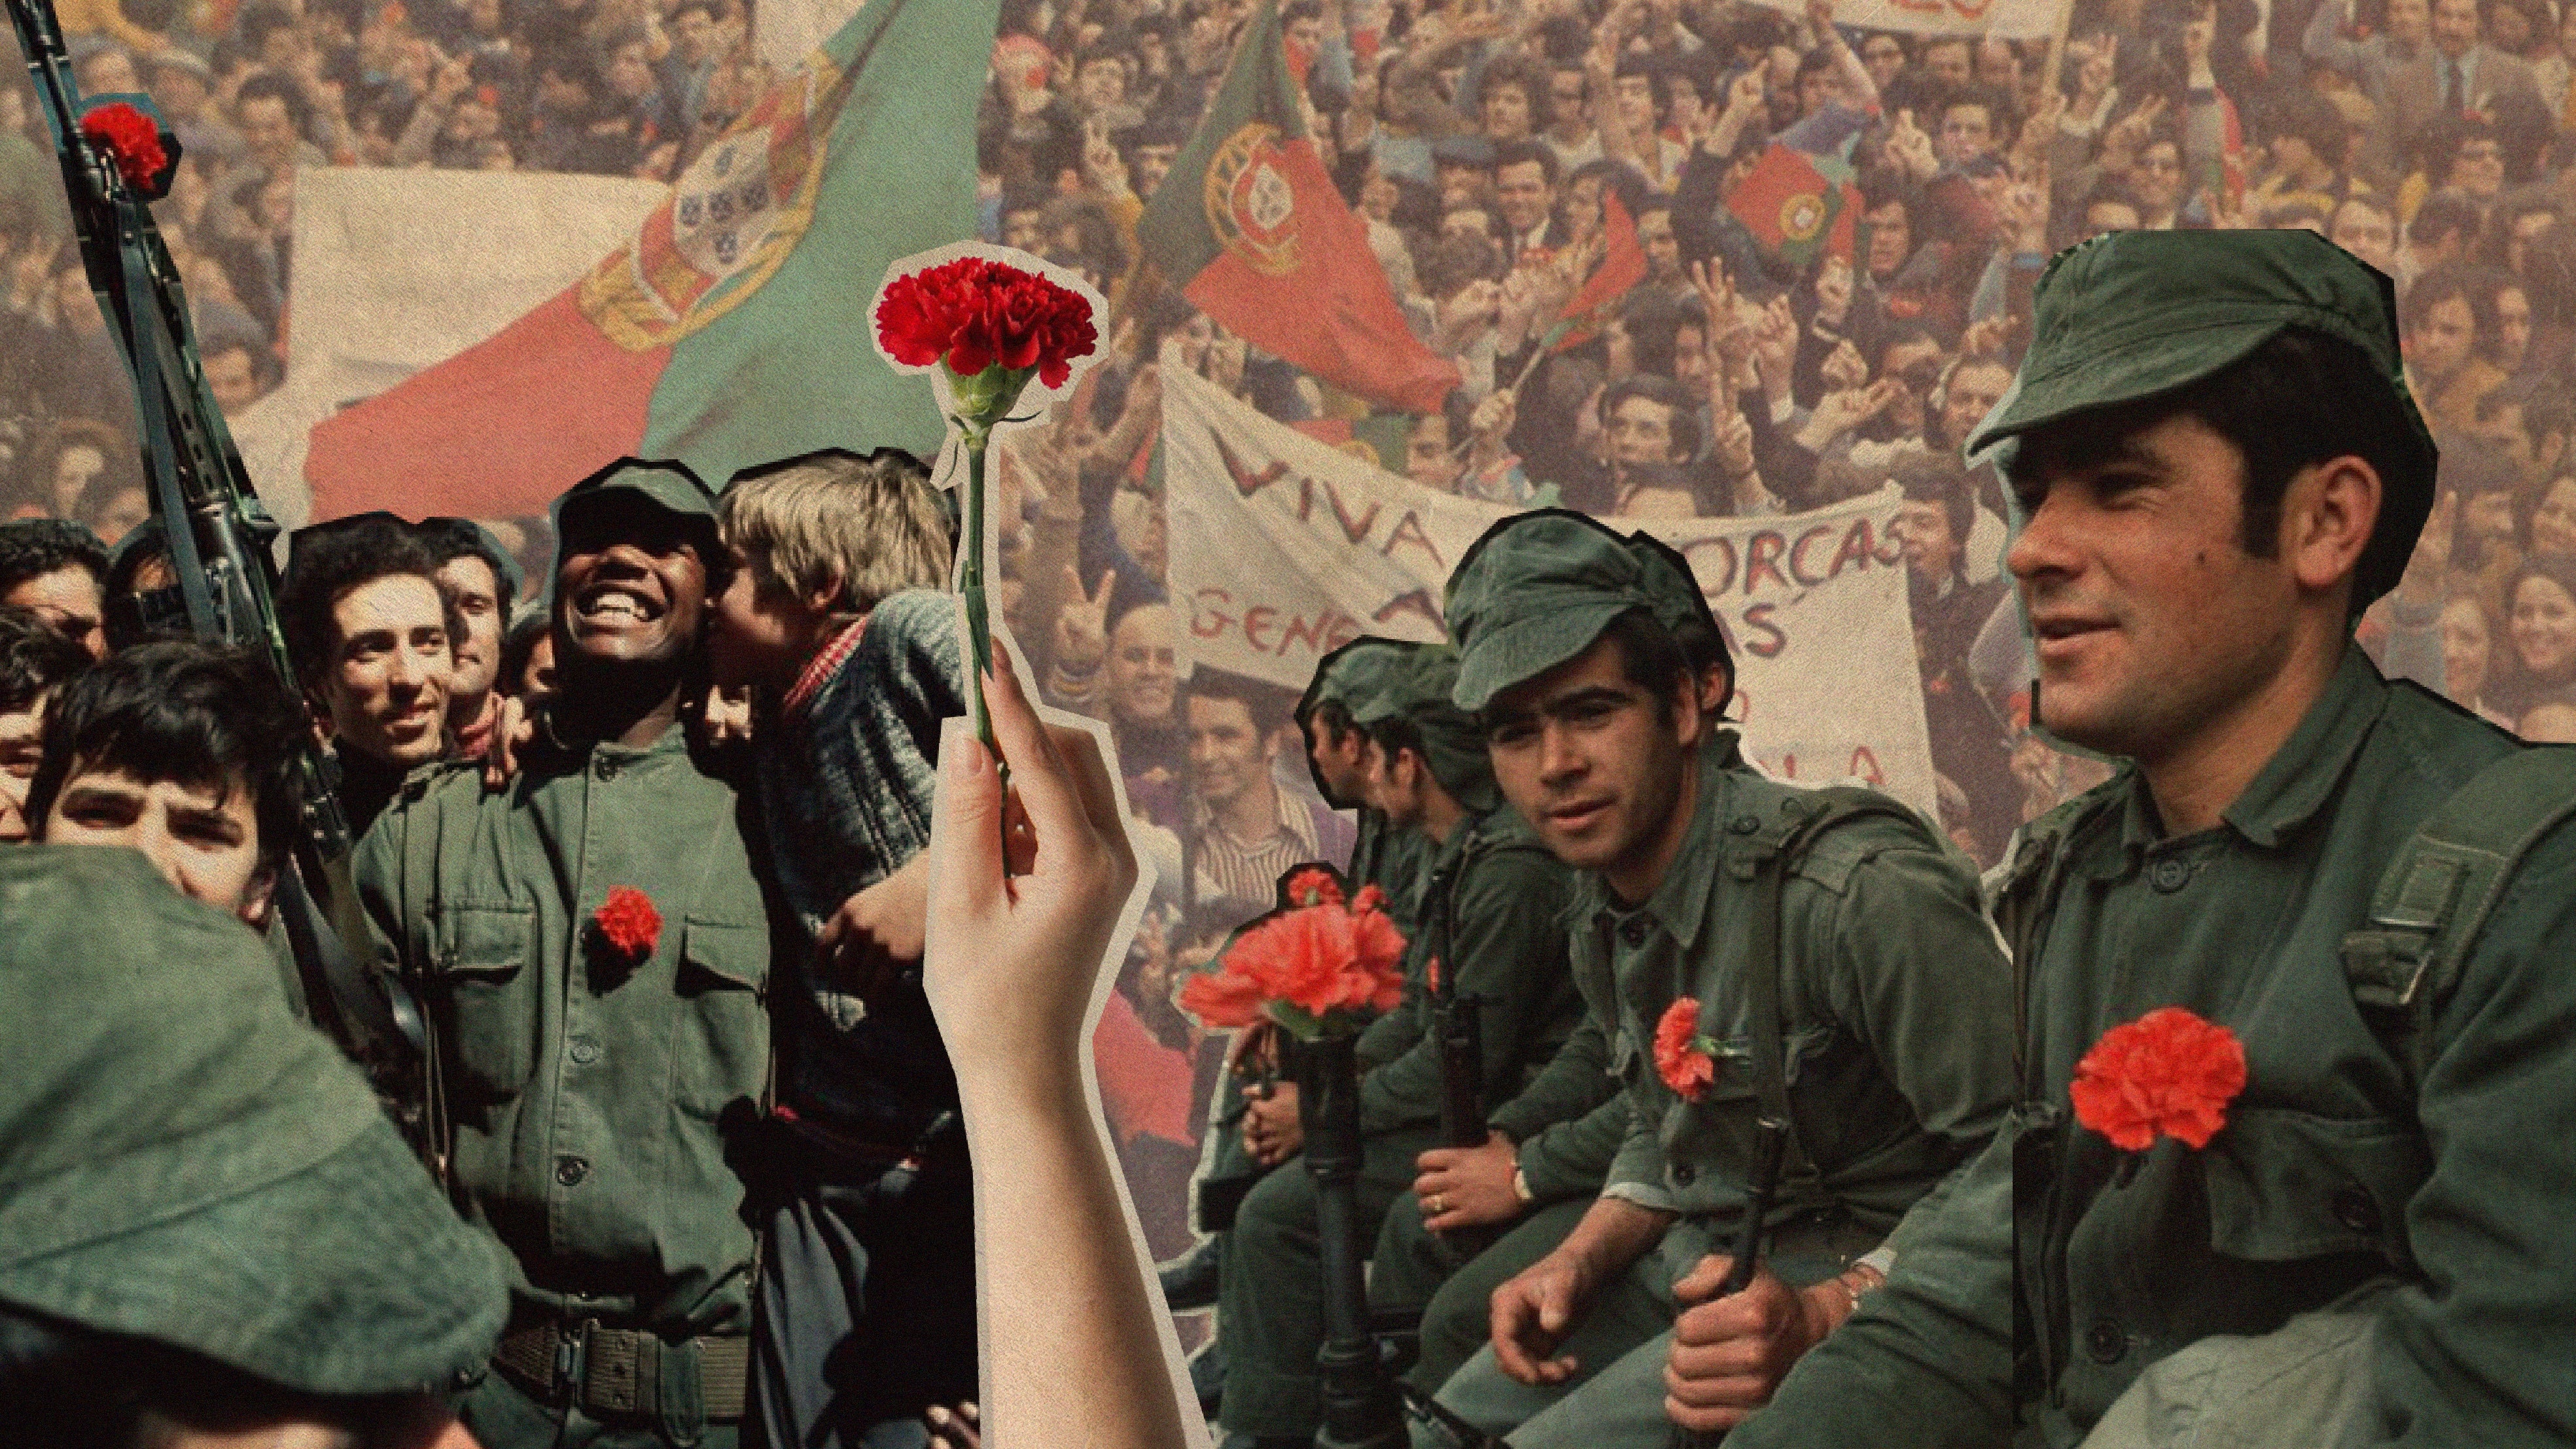 preserving freedom requires something from you: celebrating "25 de abril"